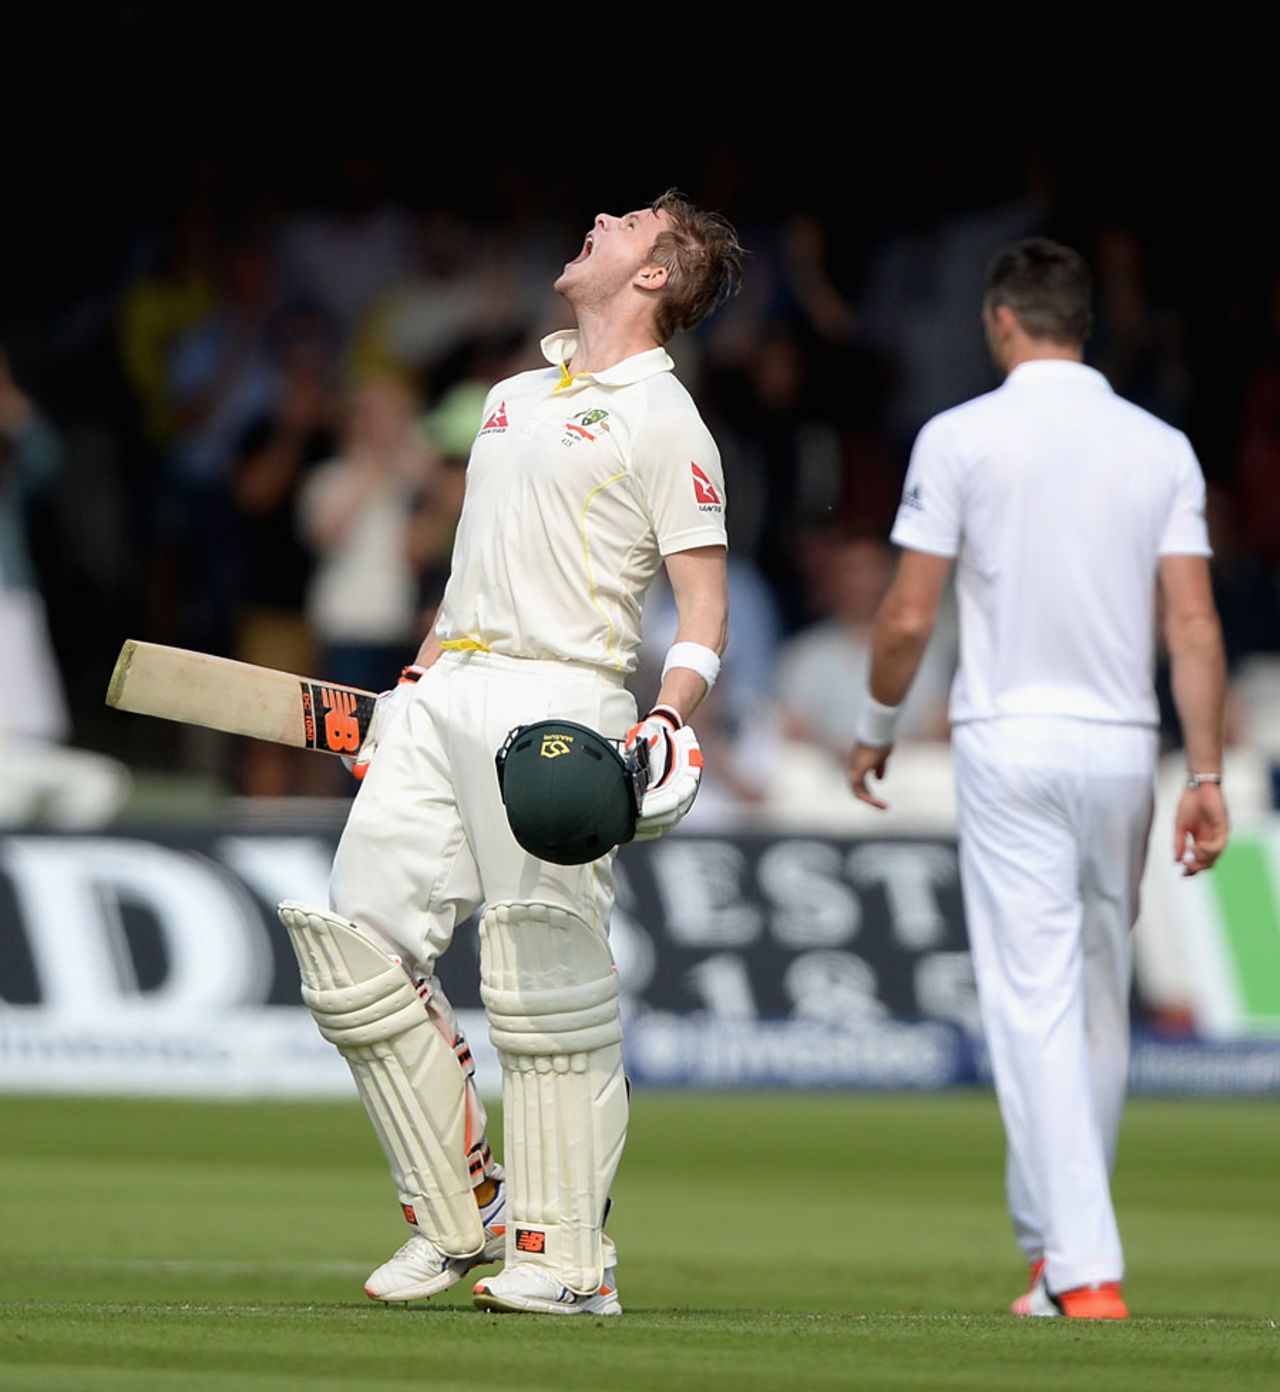 Steven Smith lets out a scream on reaching his hundred, England v Australia, 2nd Investec Ashes Test, Lord's, 1st day, July 16, 2015